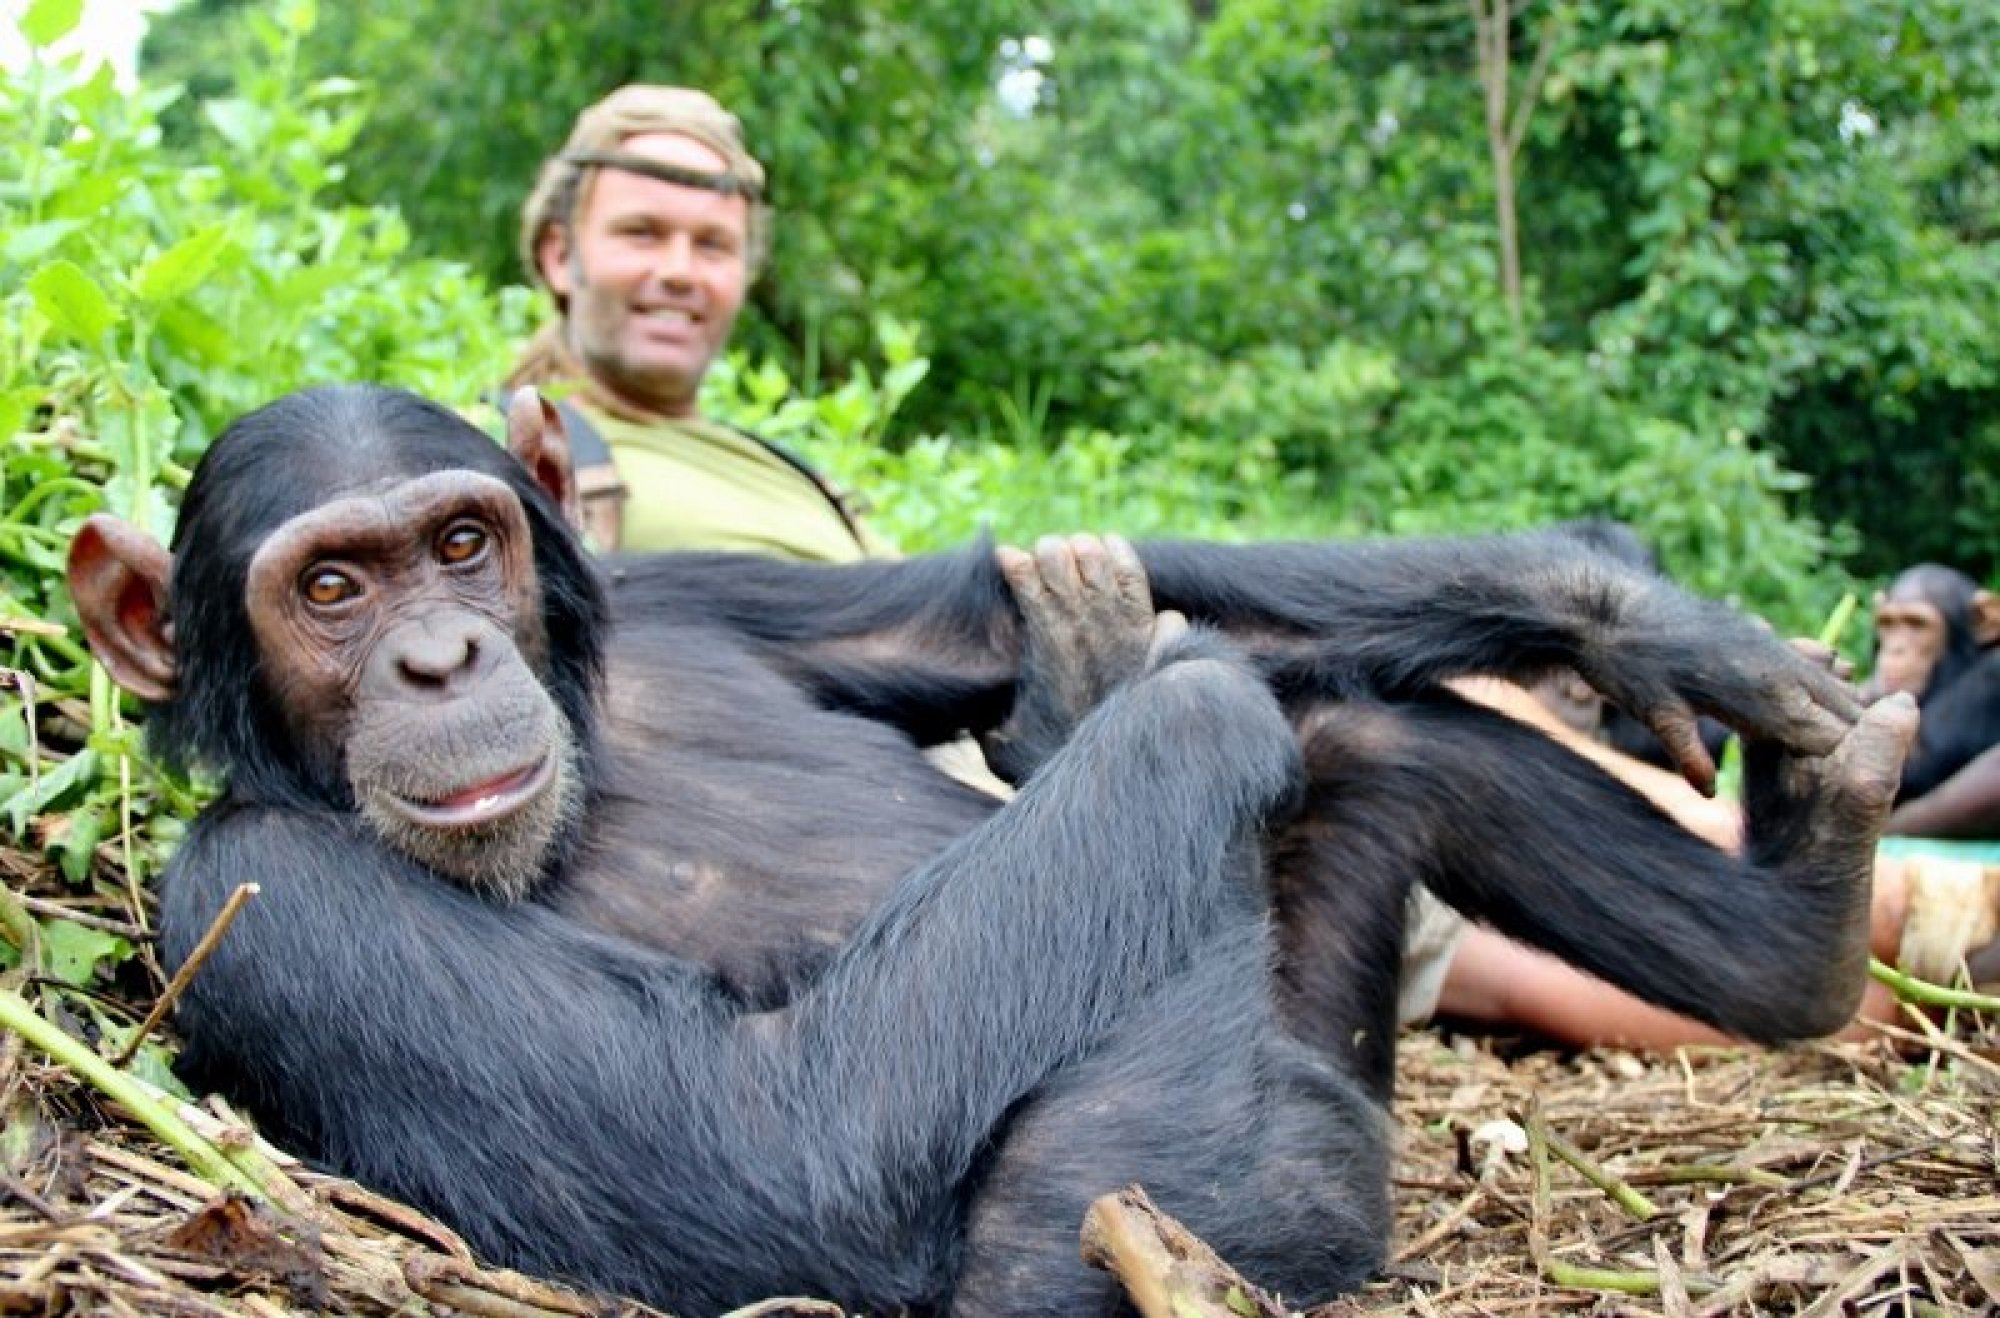 Mark with Chimpanzee in the Congo. 